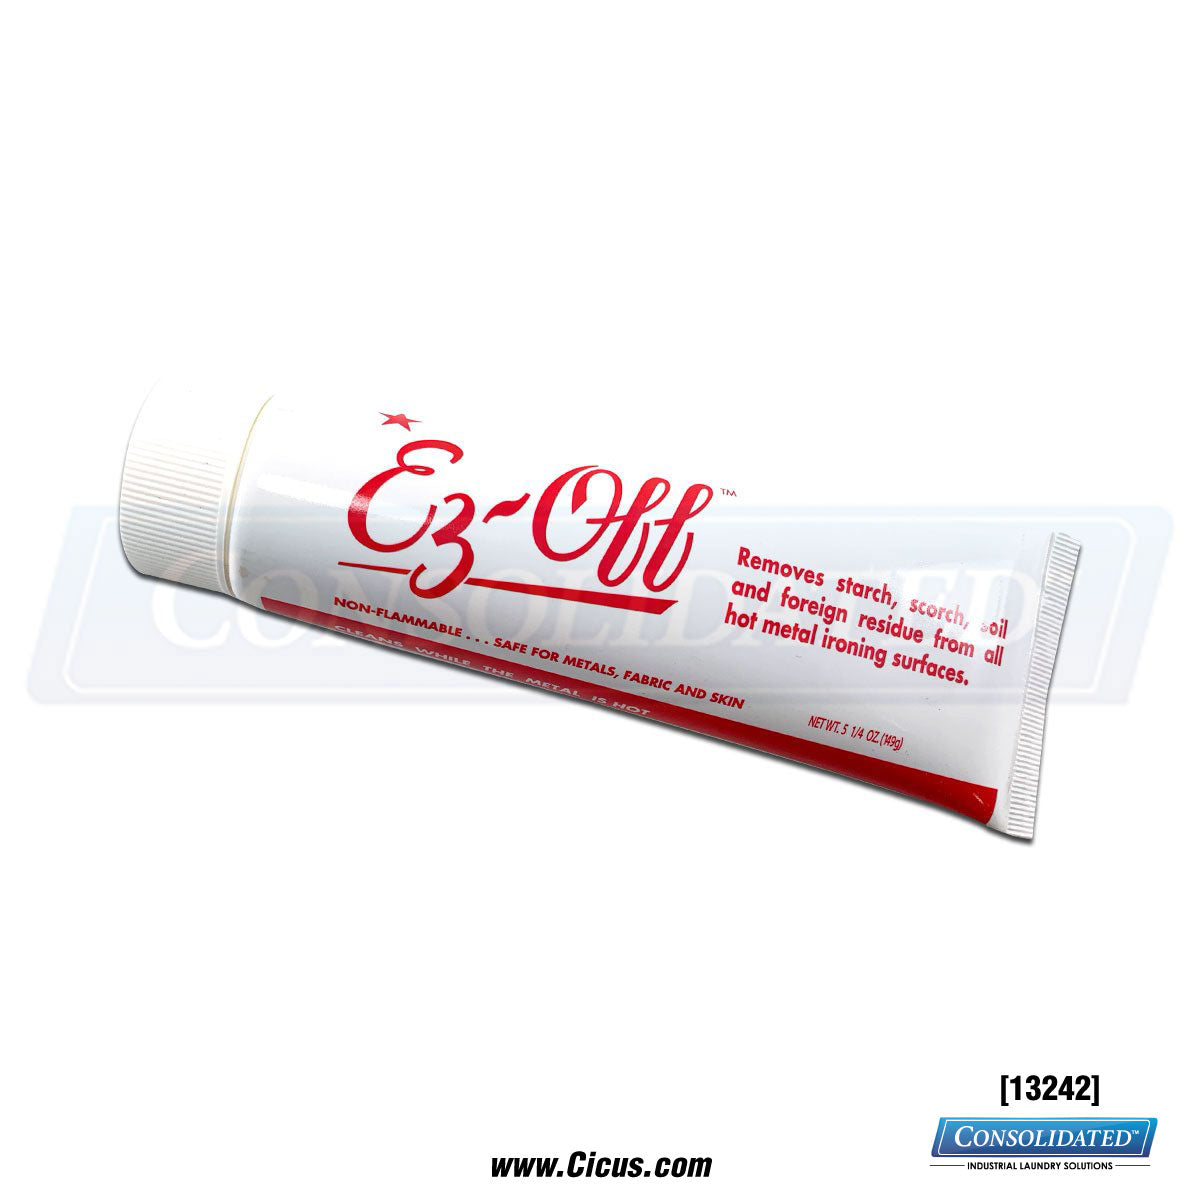 EZ OFF Iron and Press Head Cleaner [13242]